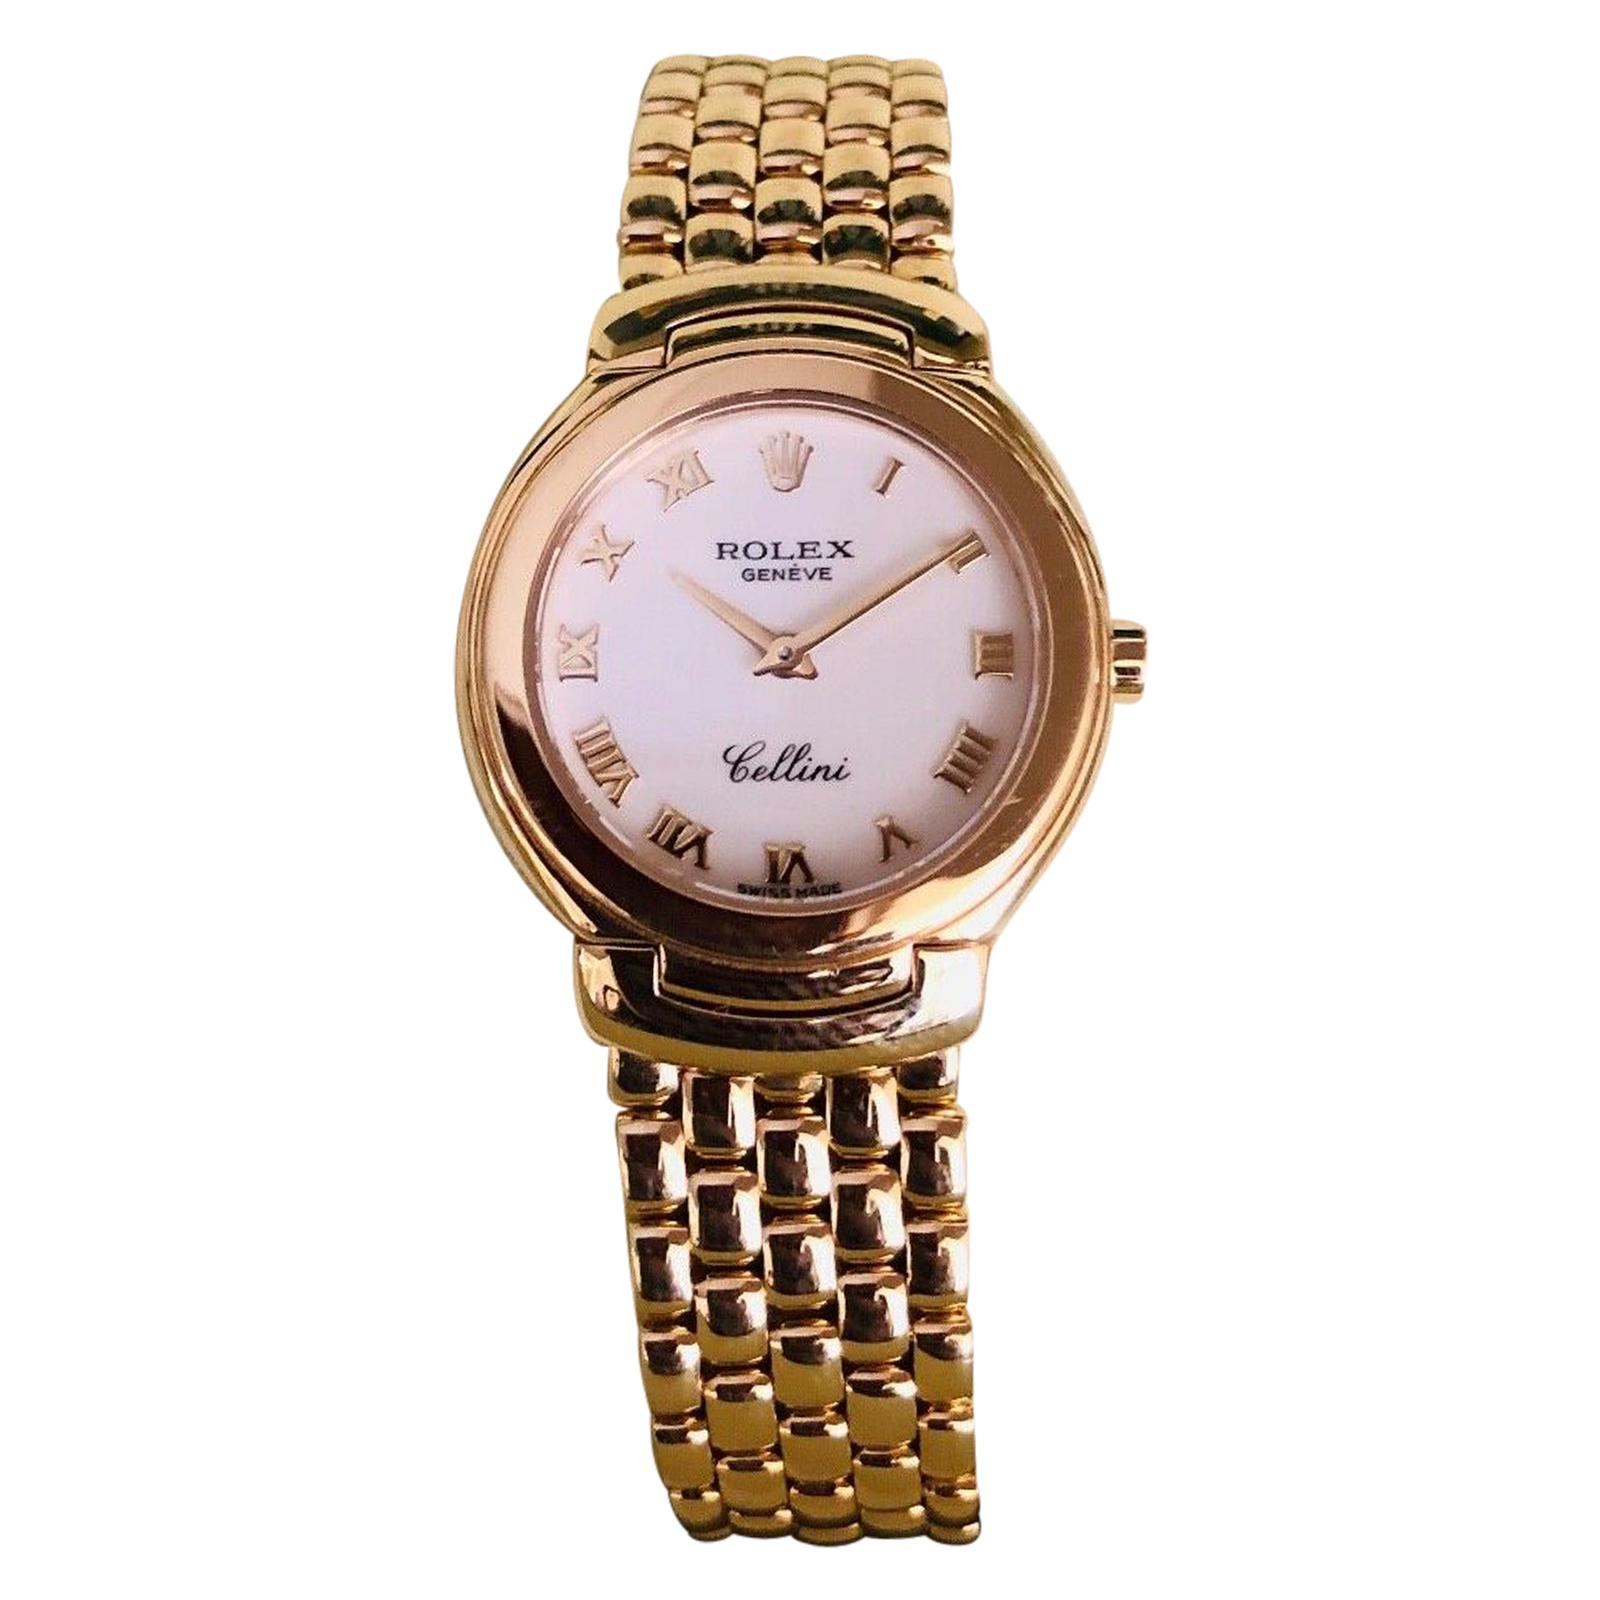 Rolex 'Cellini' 18 Karat Gold Mother of Pearl Watch 66.5 Grams